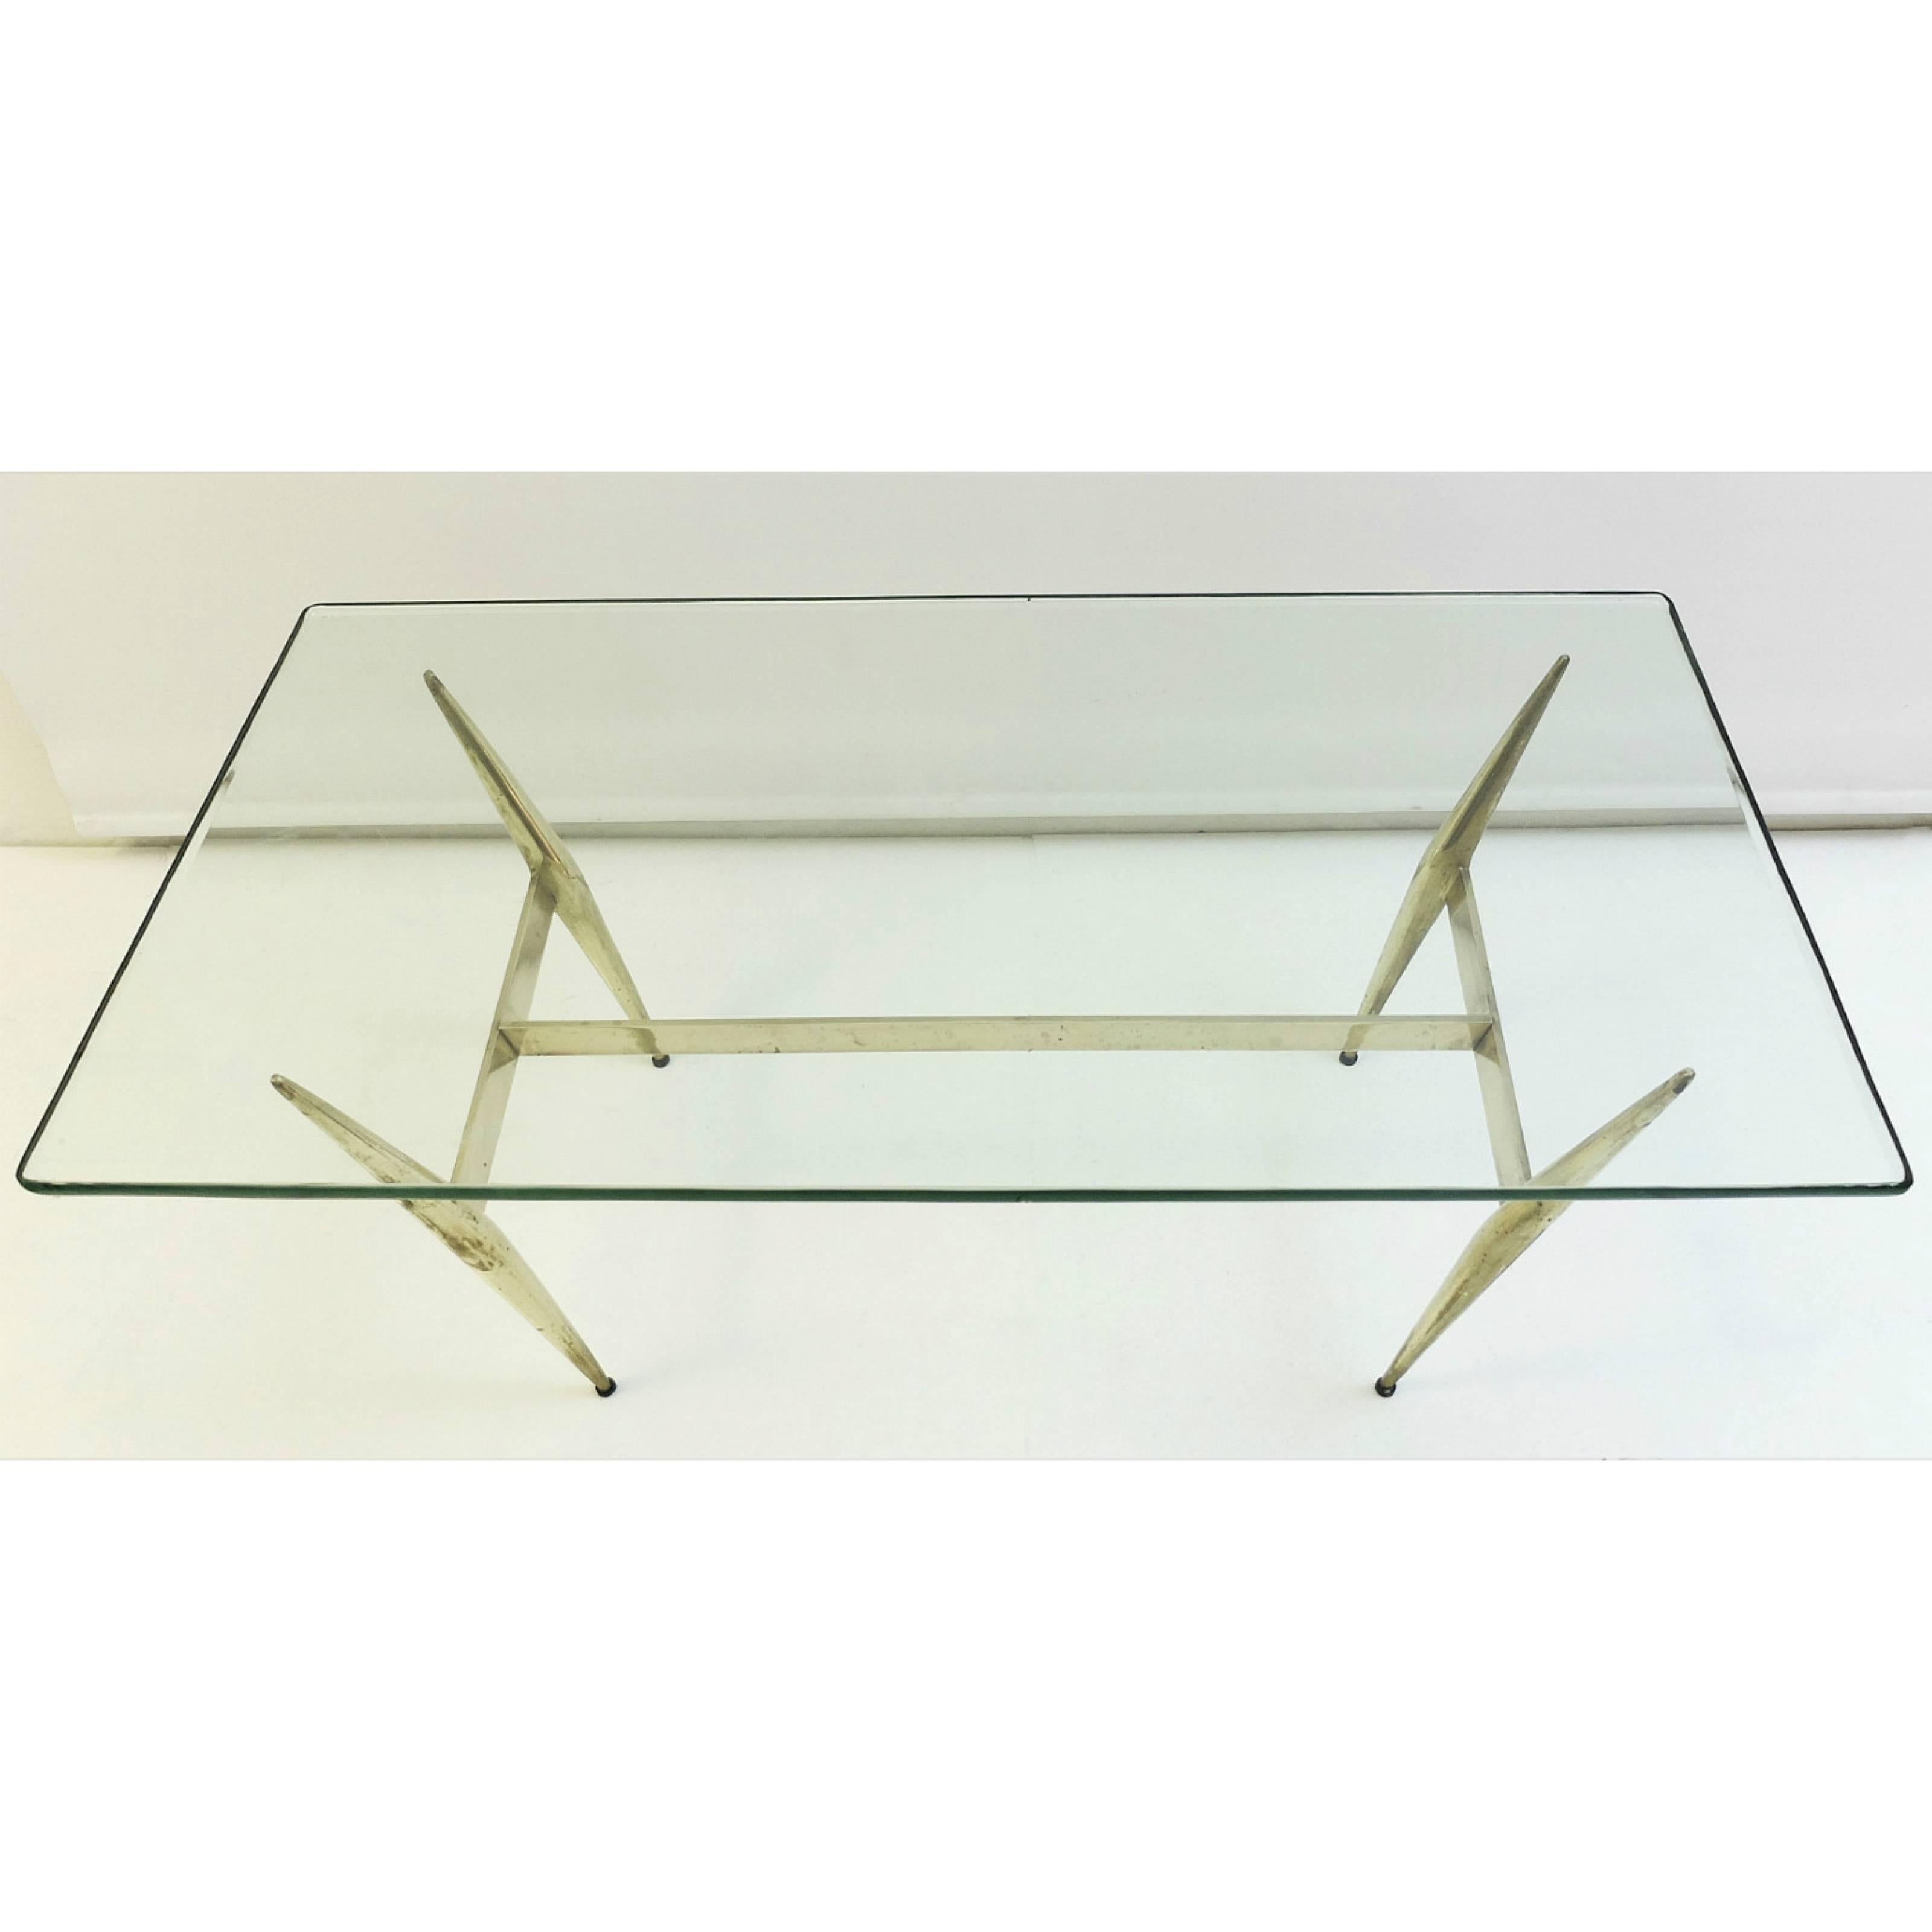 Elegant crystal art coffee table in brass and glass.